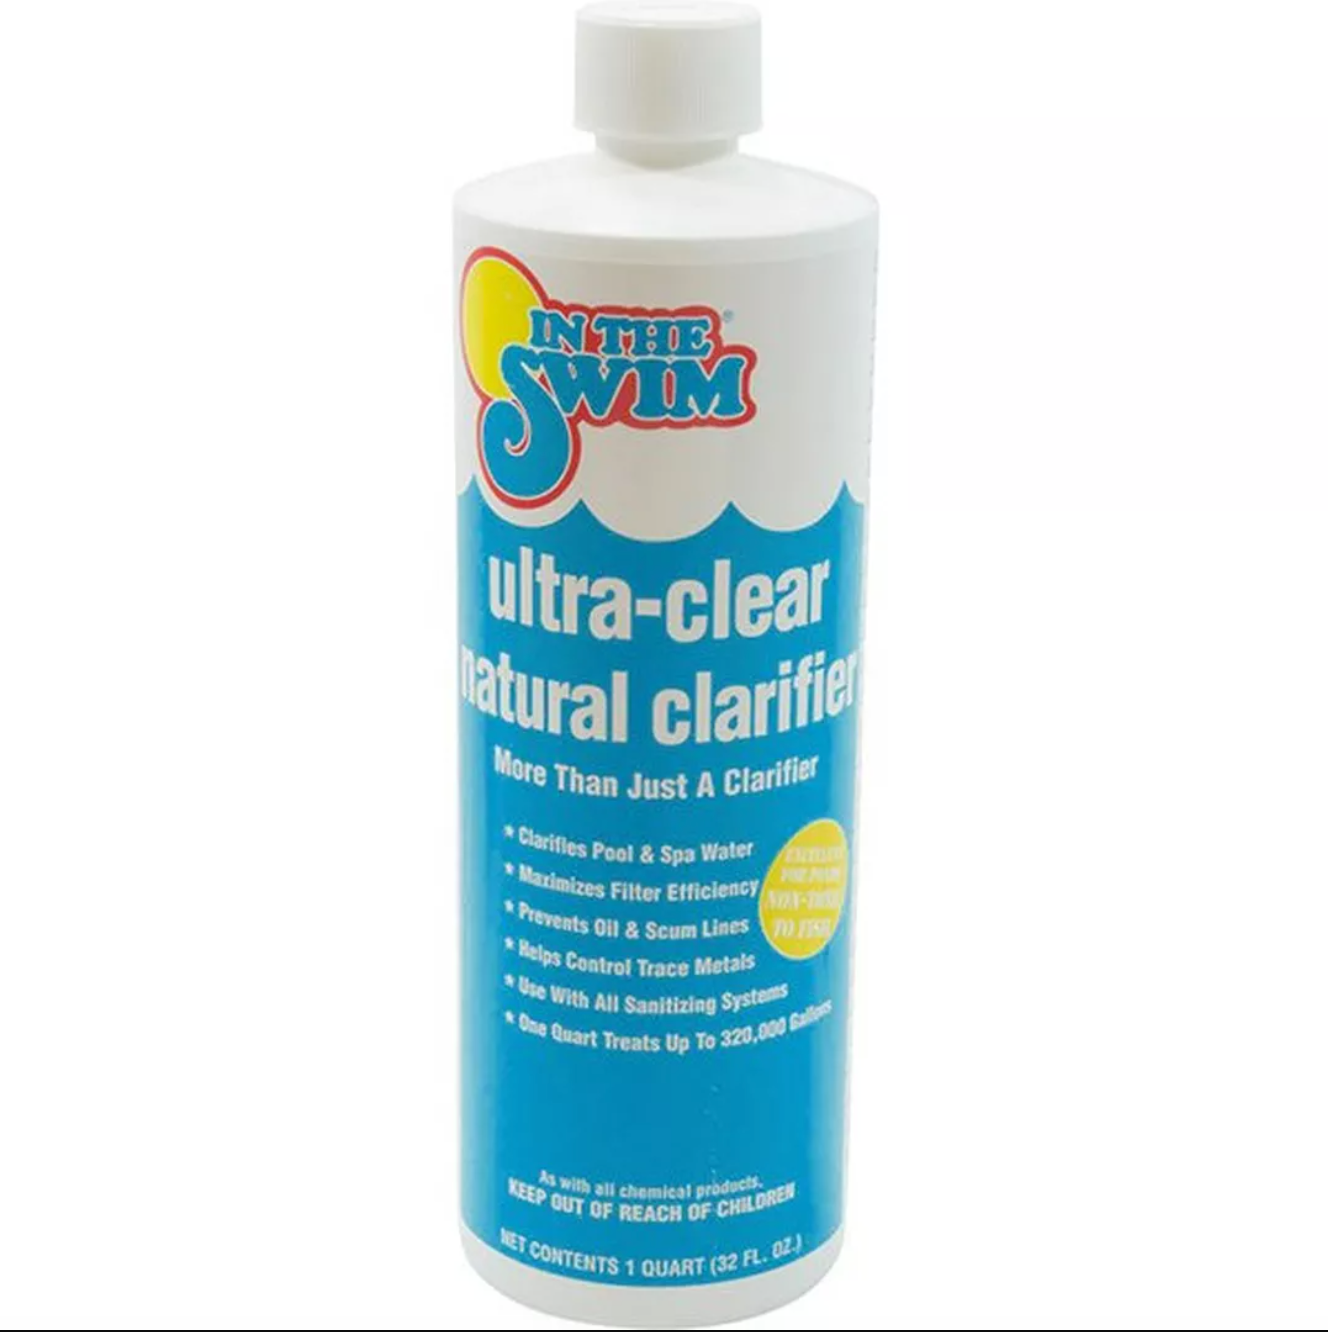 In The Swim: Ultra-Clear 4-In-1 Natural Clarifier (1 Qt) $11 + Free Shipping